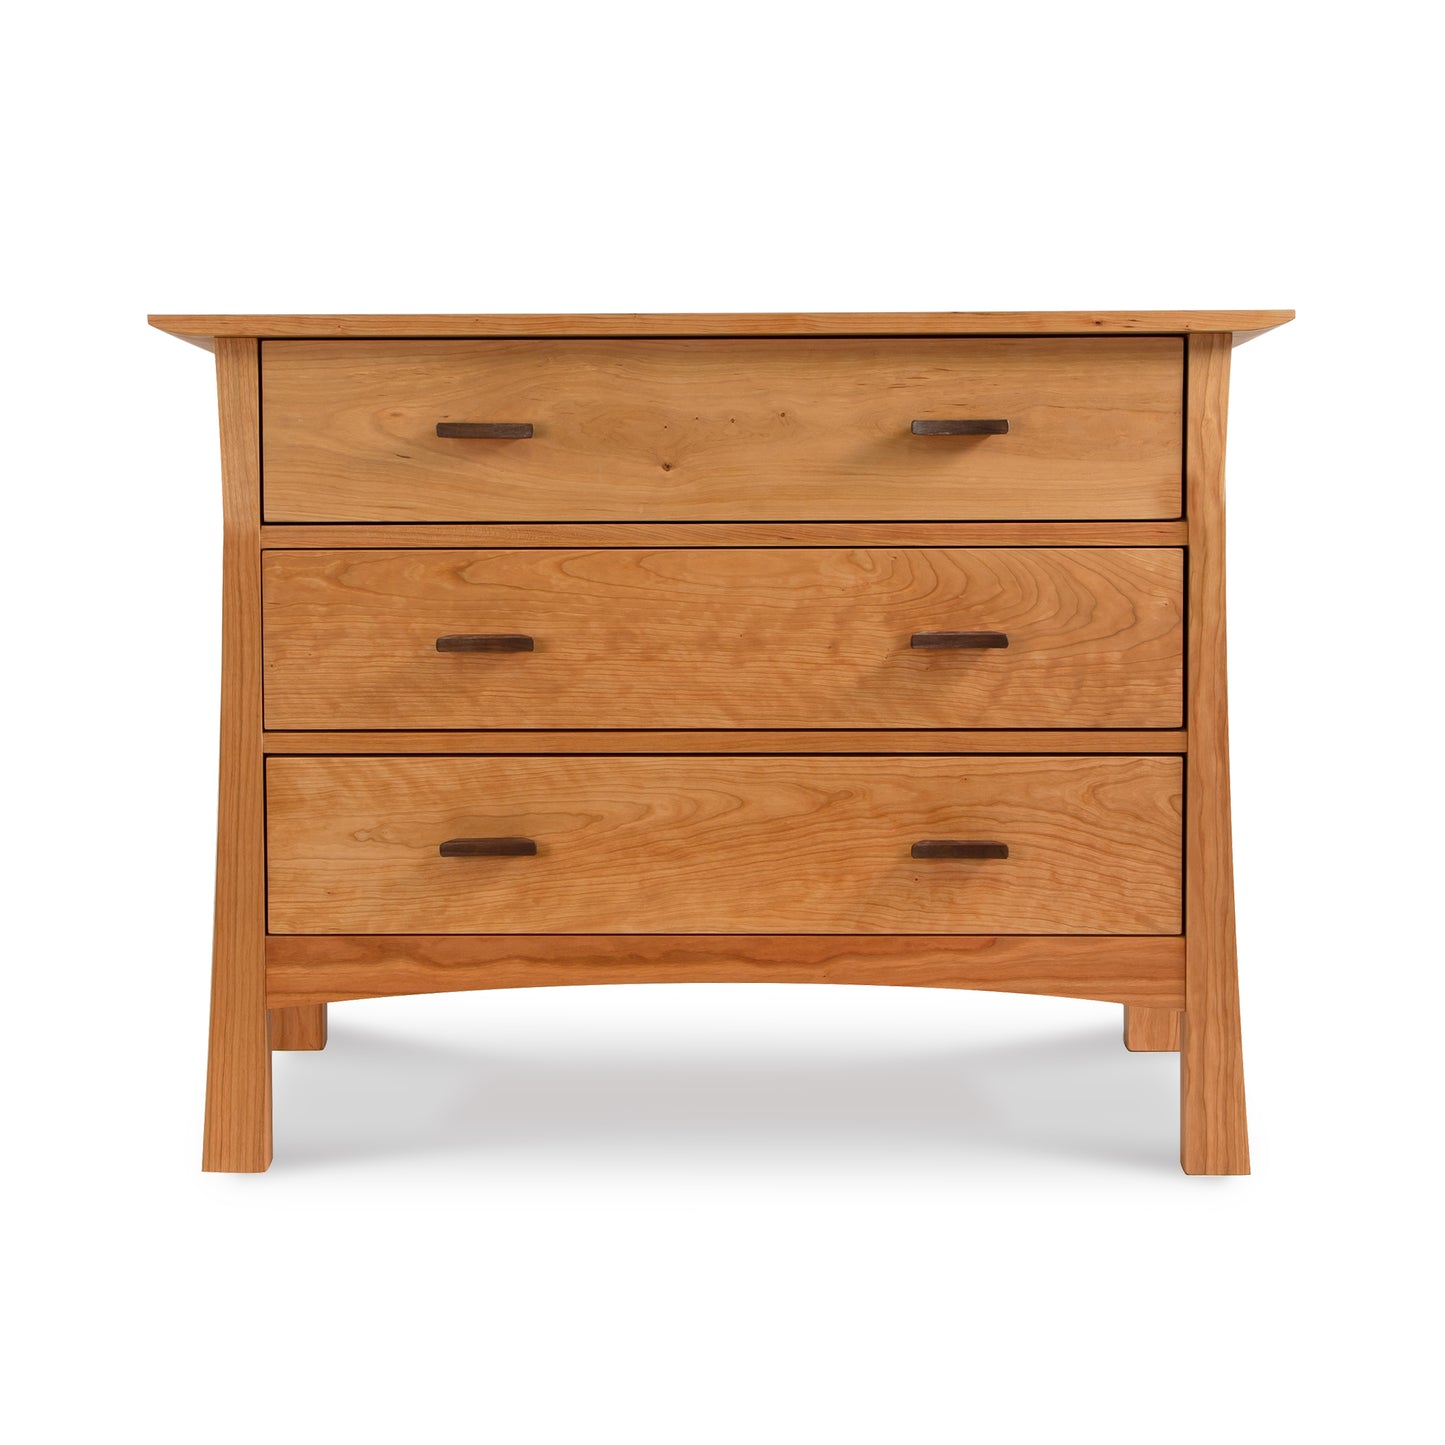 A Vermont Furniture Designs Contemporary Craftsman 3-Drawer Chest made of hardwoods, set against a white background.